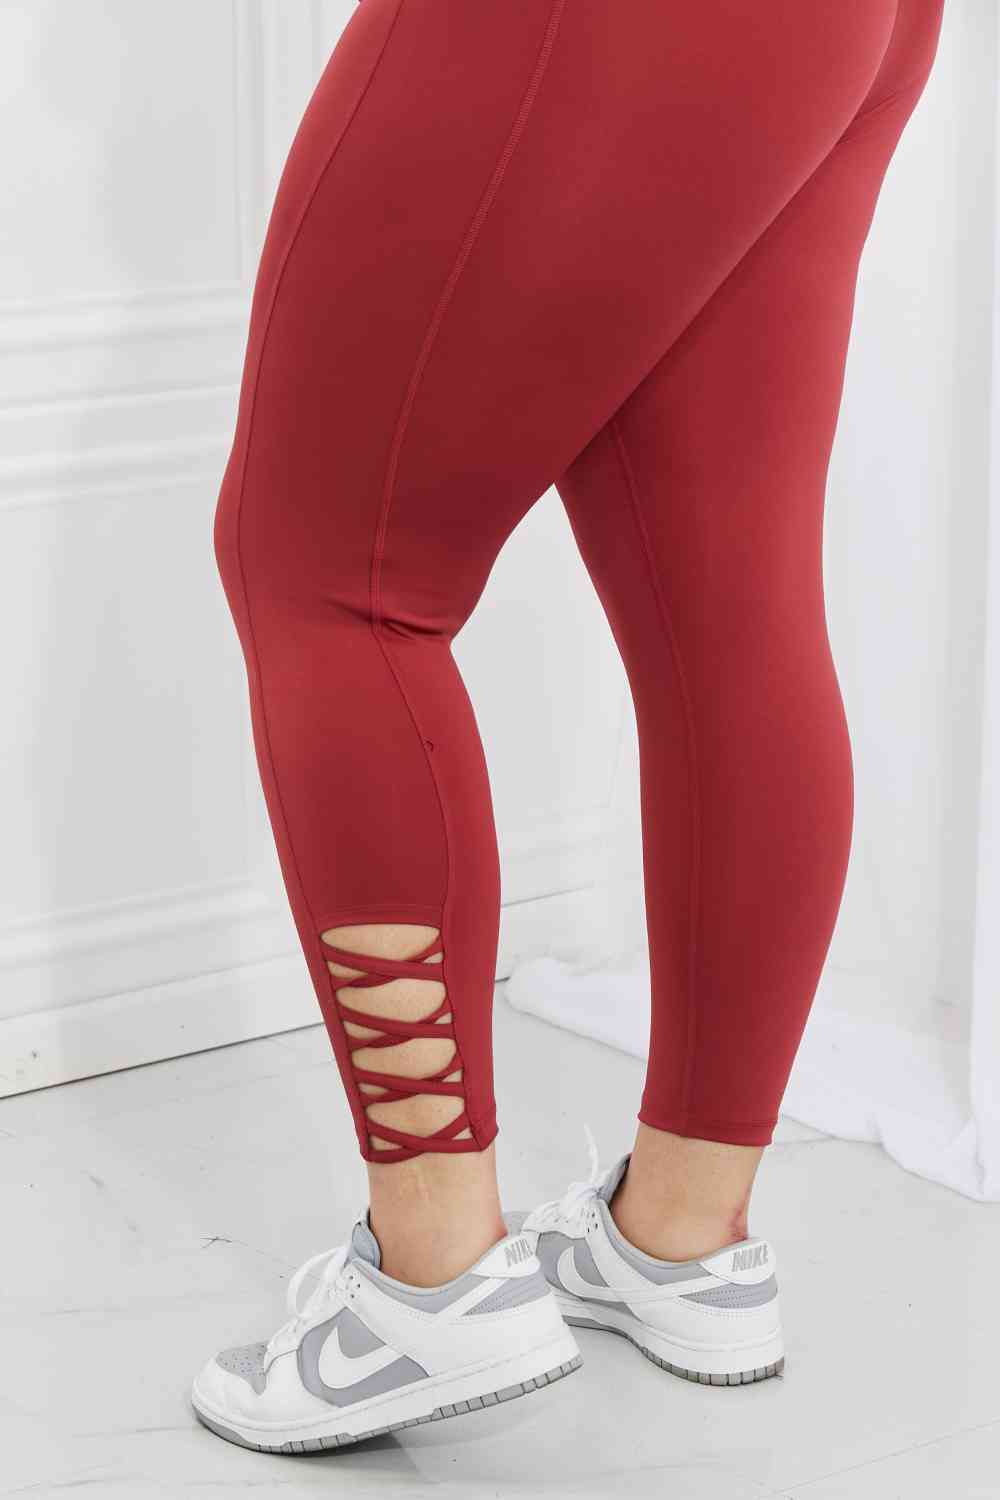 Yelete Ready For Action Full Size Ankle Cutout Active Leggings in Brick Red BLUE ZONE PLANET